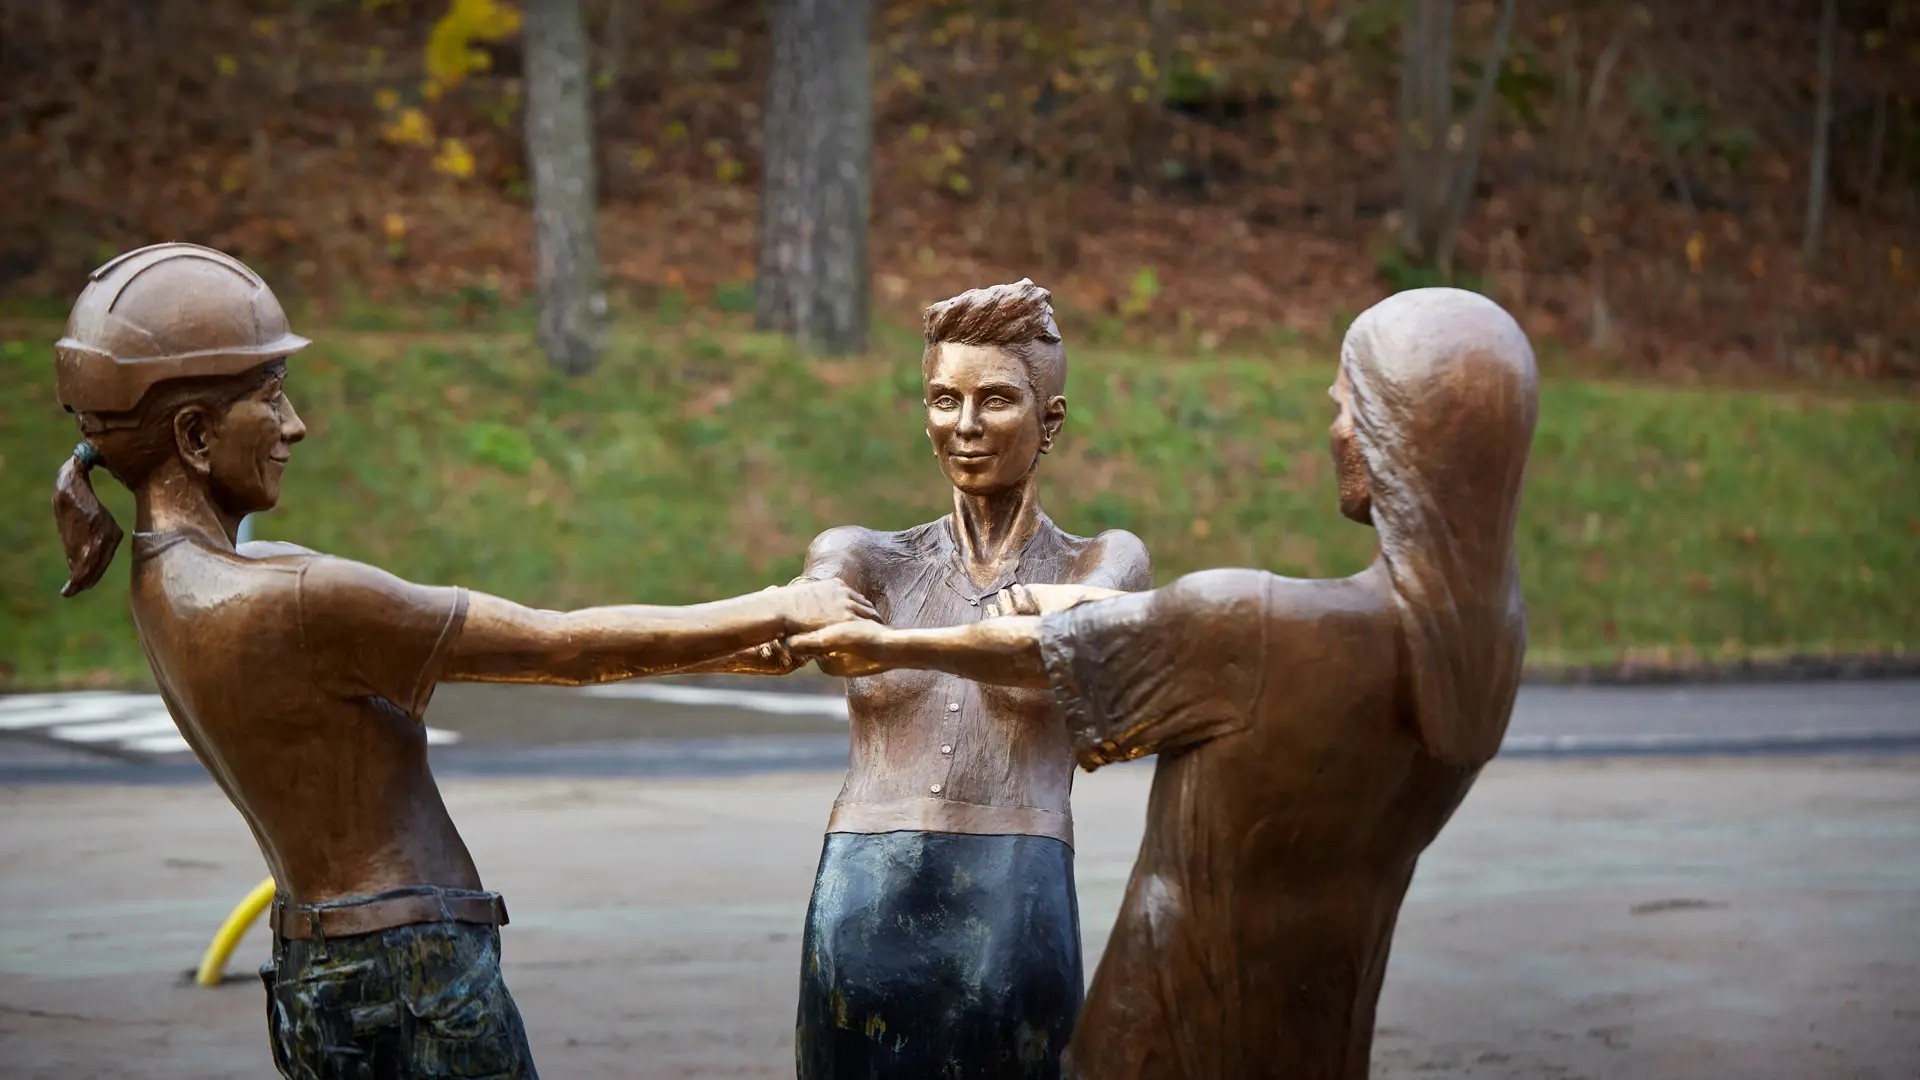 Statue on Chalmers campus called Seeing yourself in others